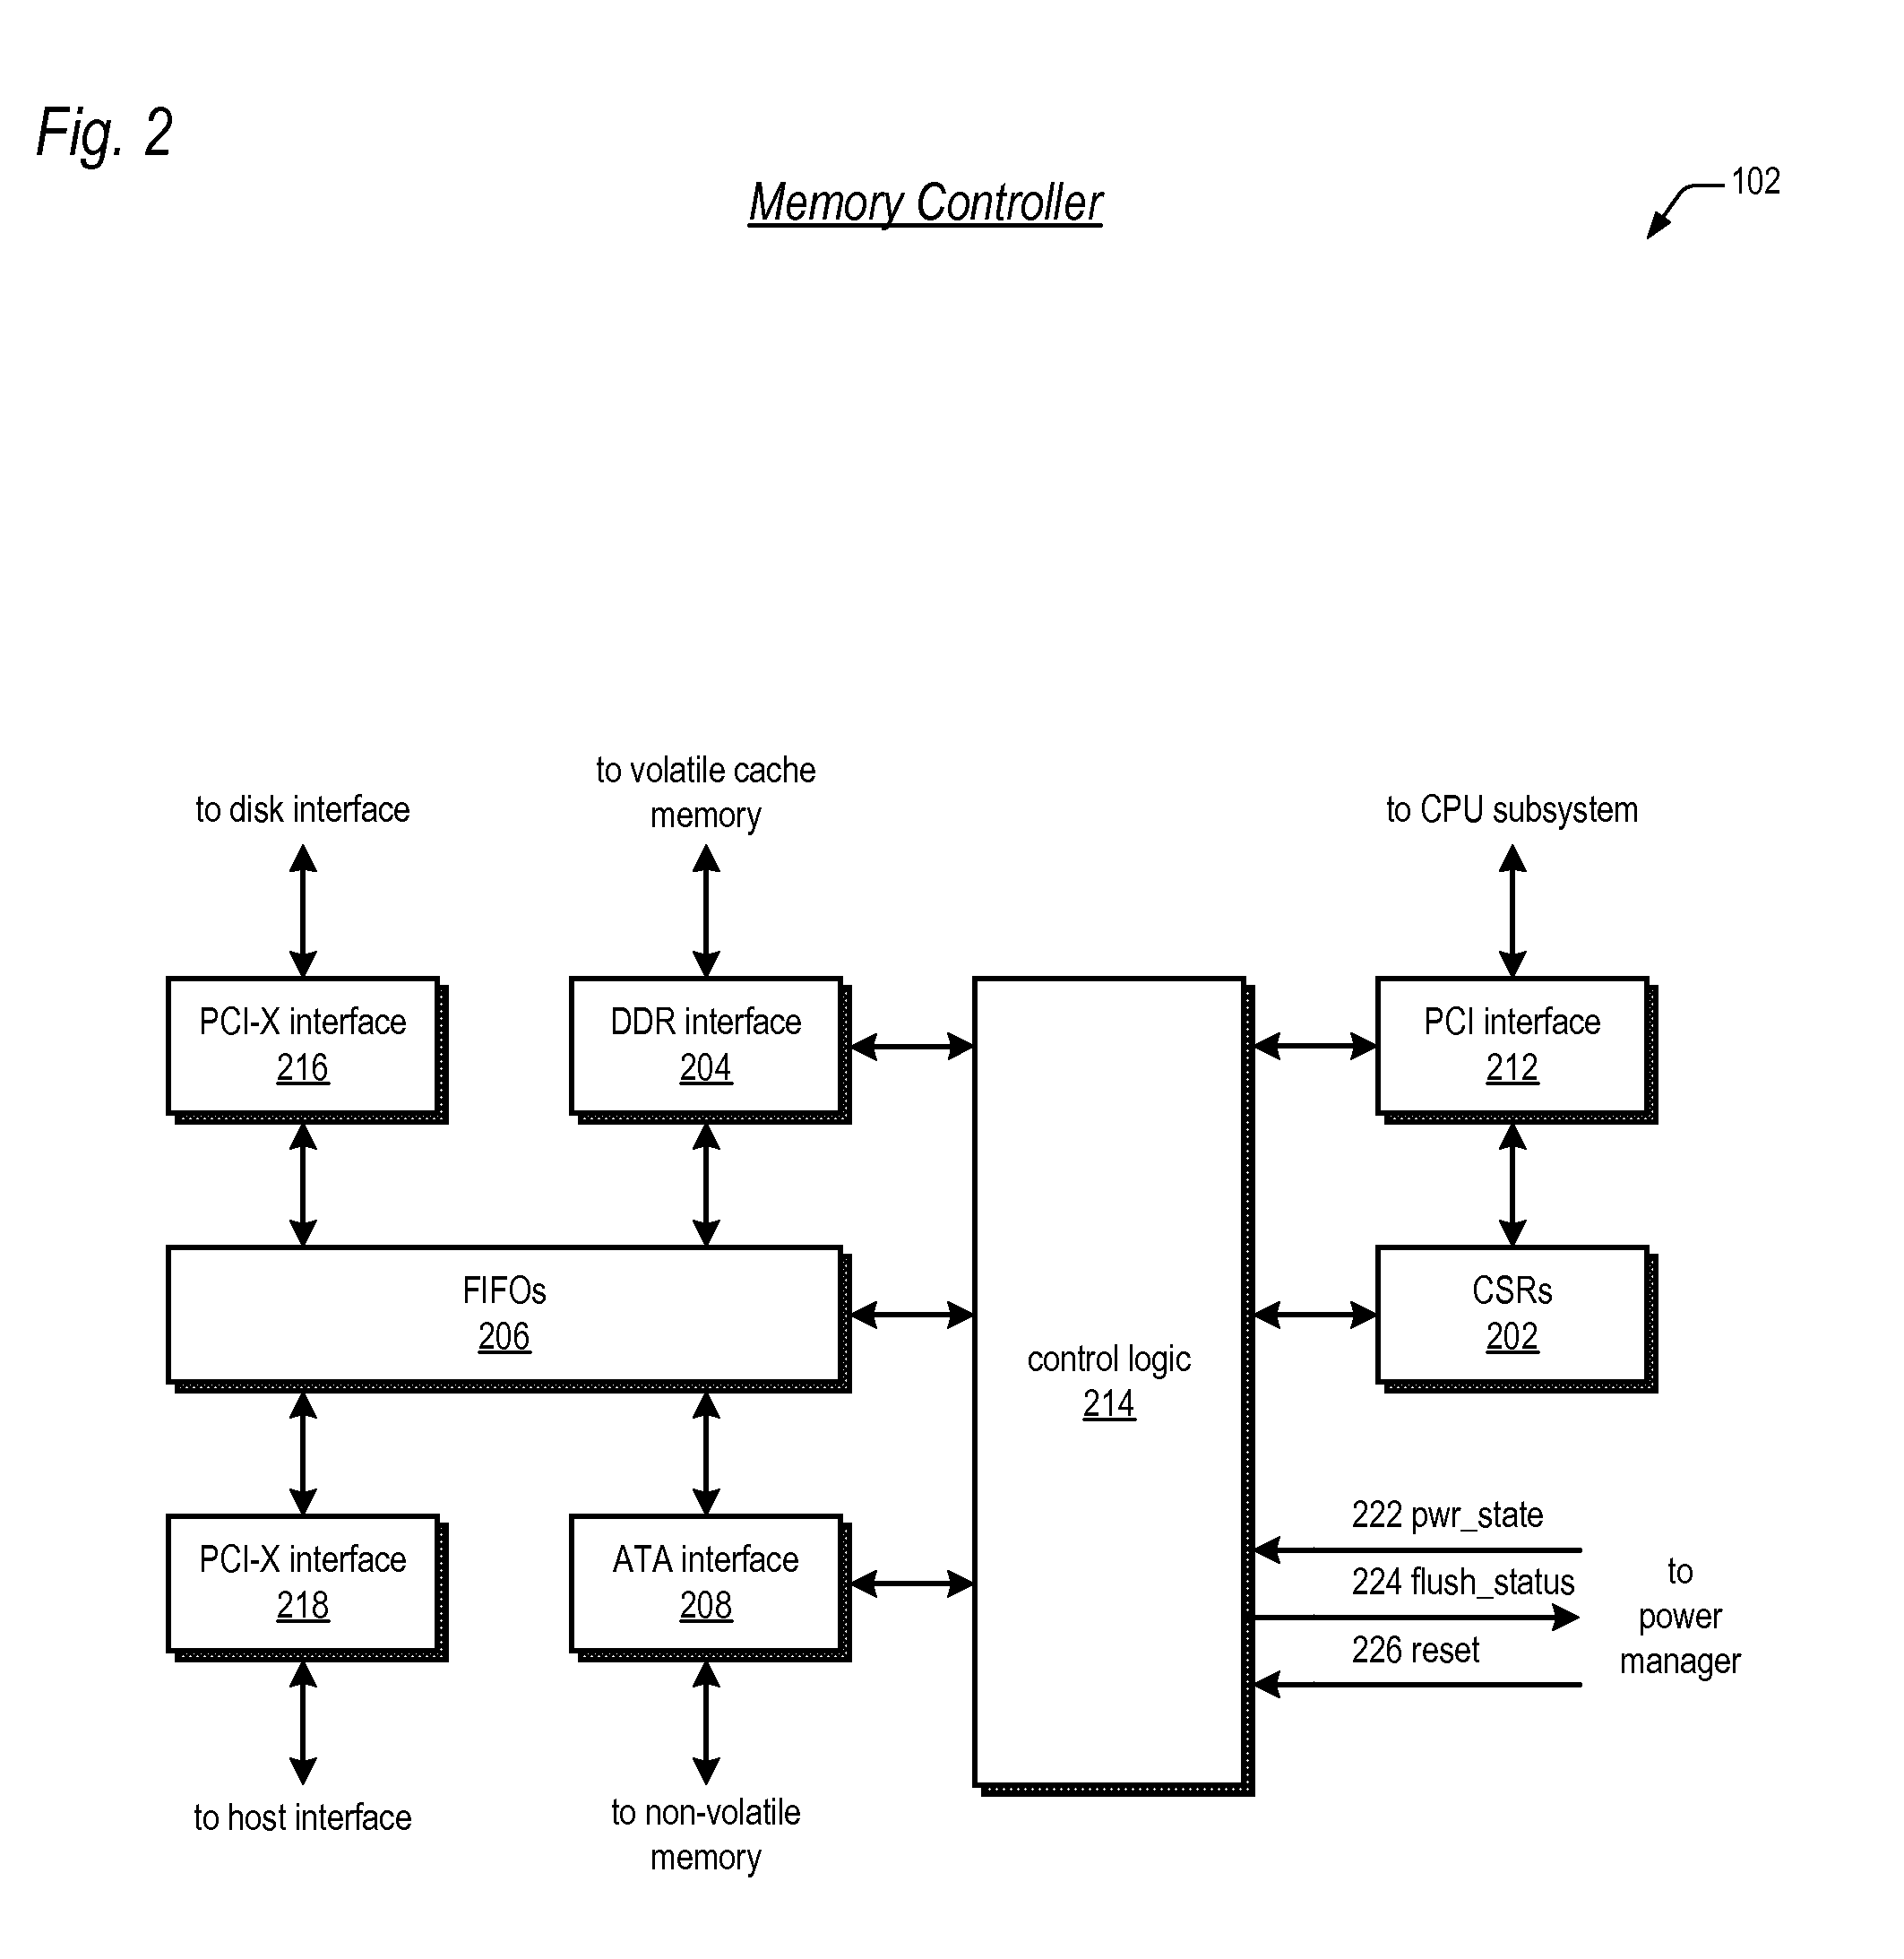 Dynamic write cache size adjustment in raid controller with capacitor backup energy source